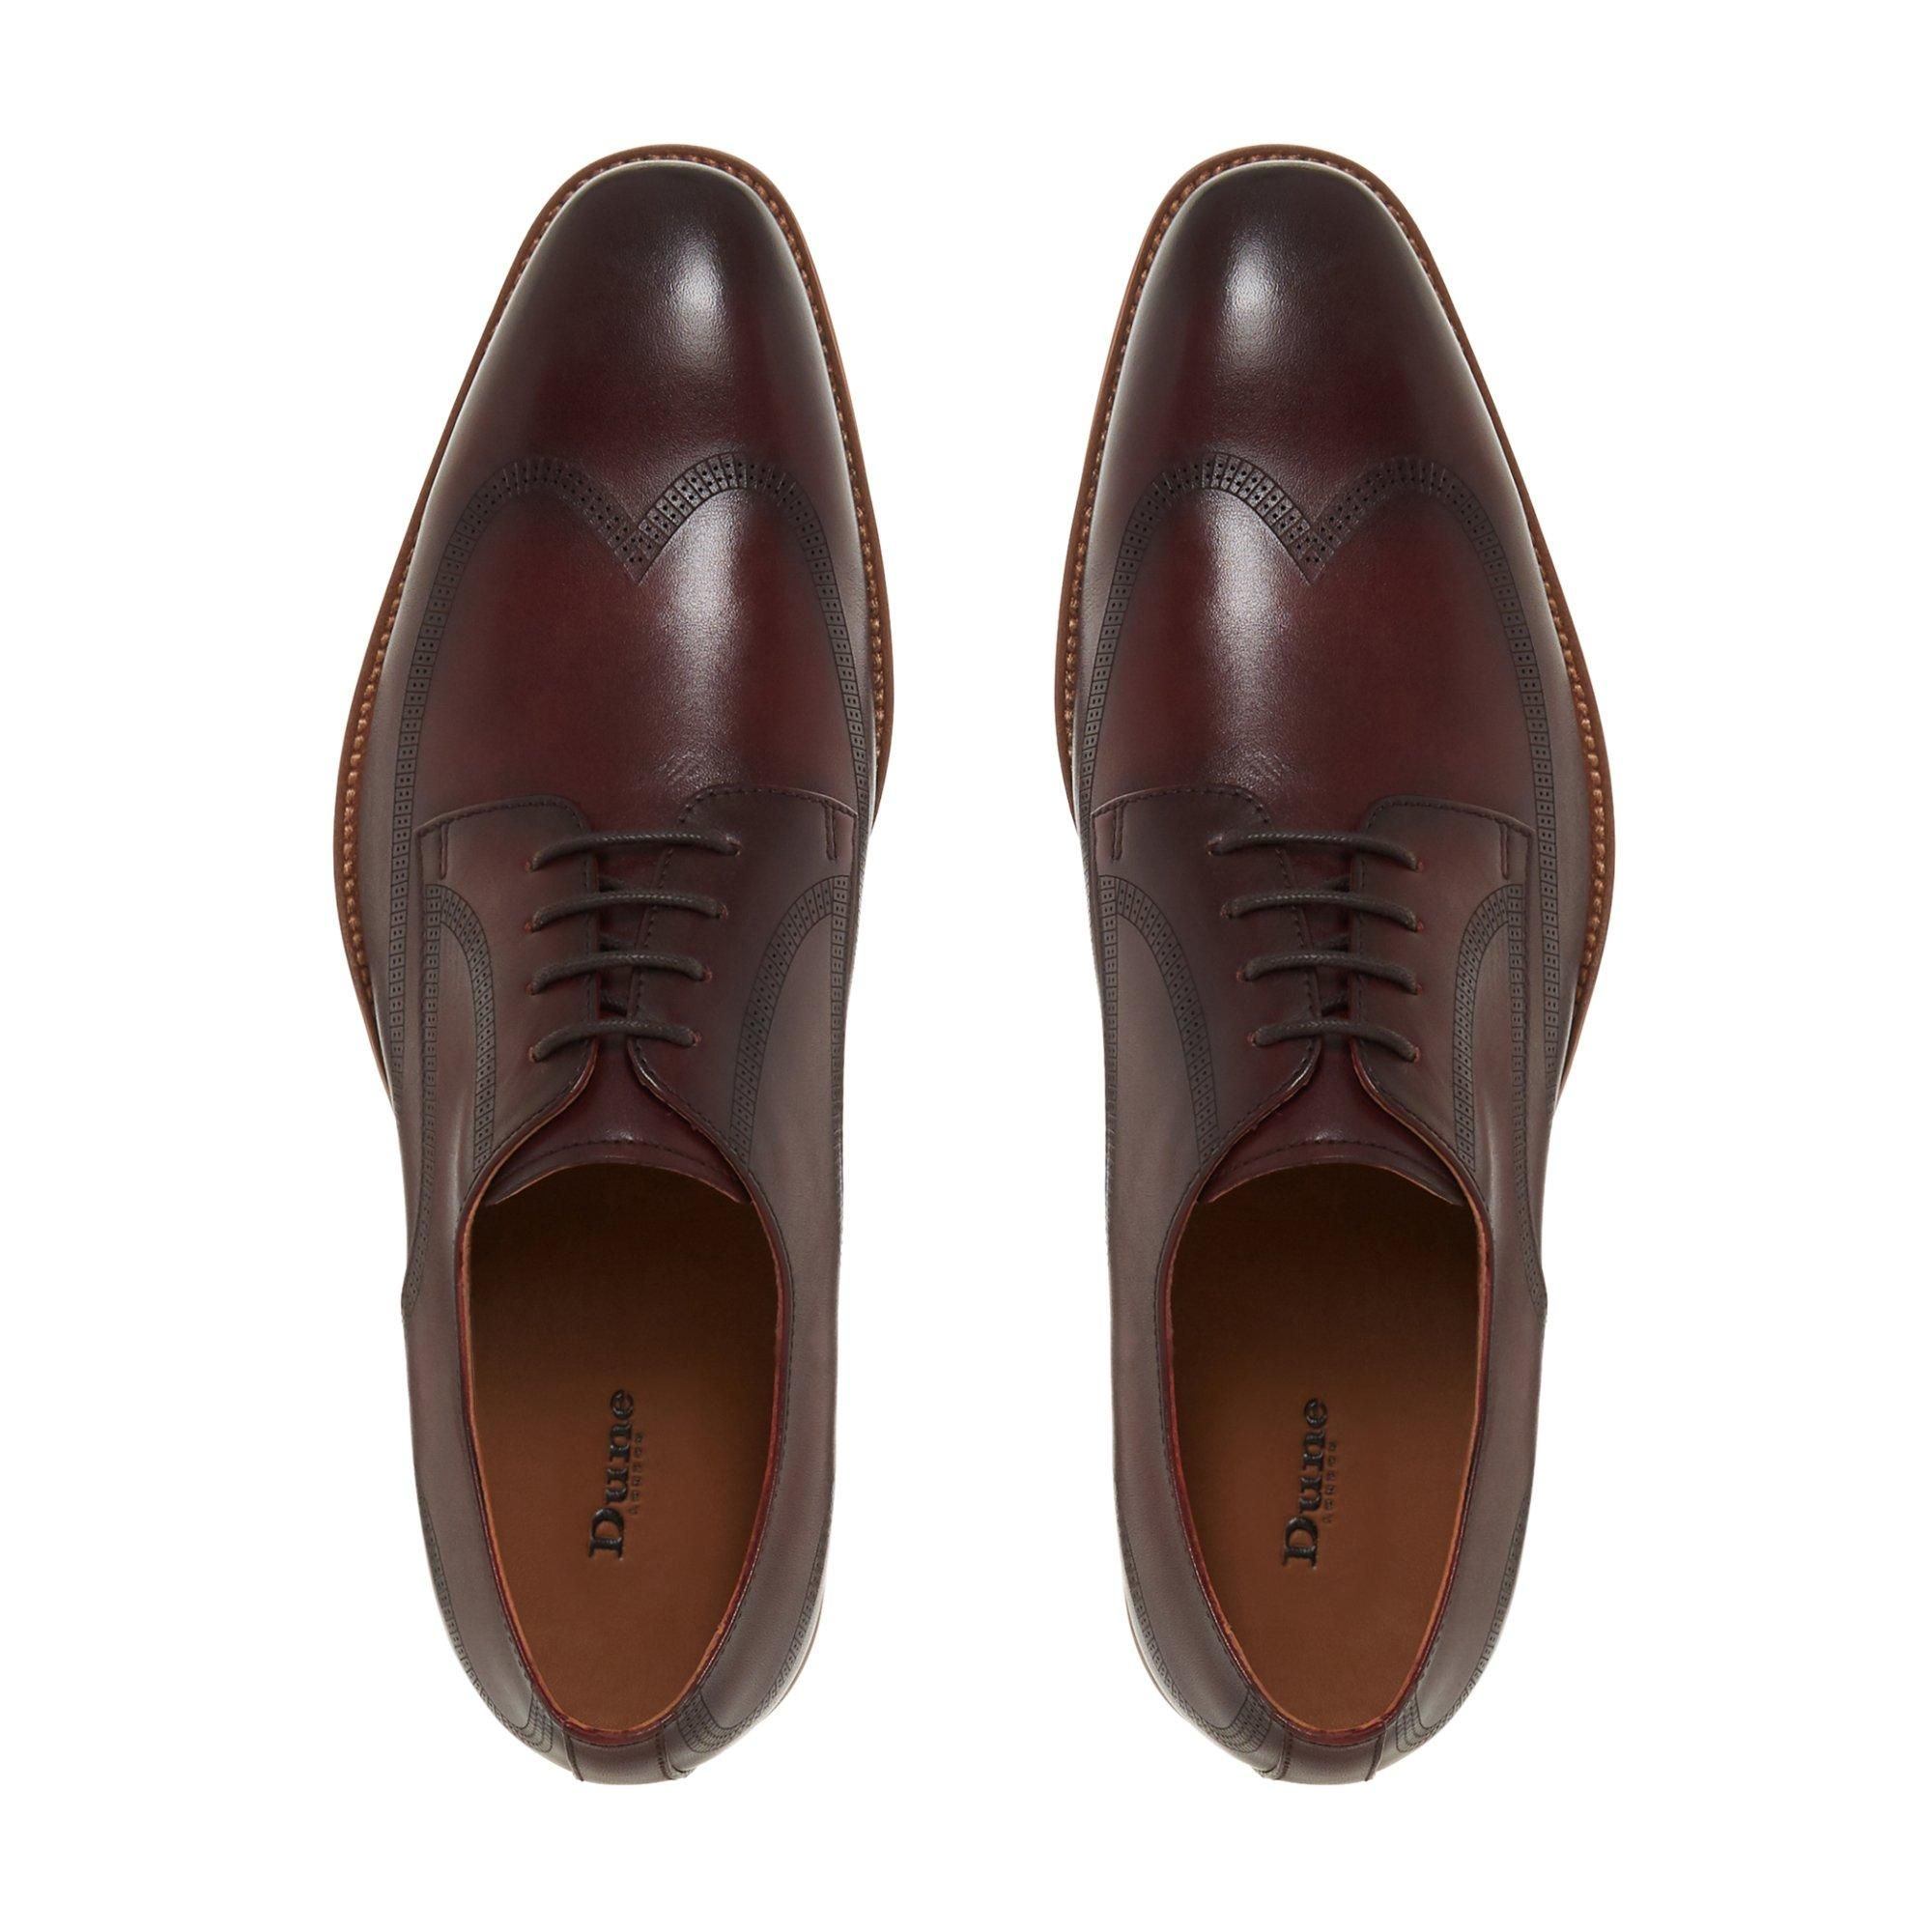 Update your formal looks with this dapper gibson shoe from Dune London. Showcasing a classic wingtip design with subtle topstitching. It's finished with a round toe, a low block heel and lace-up fastenings.